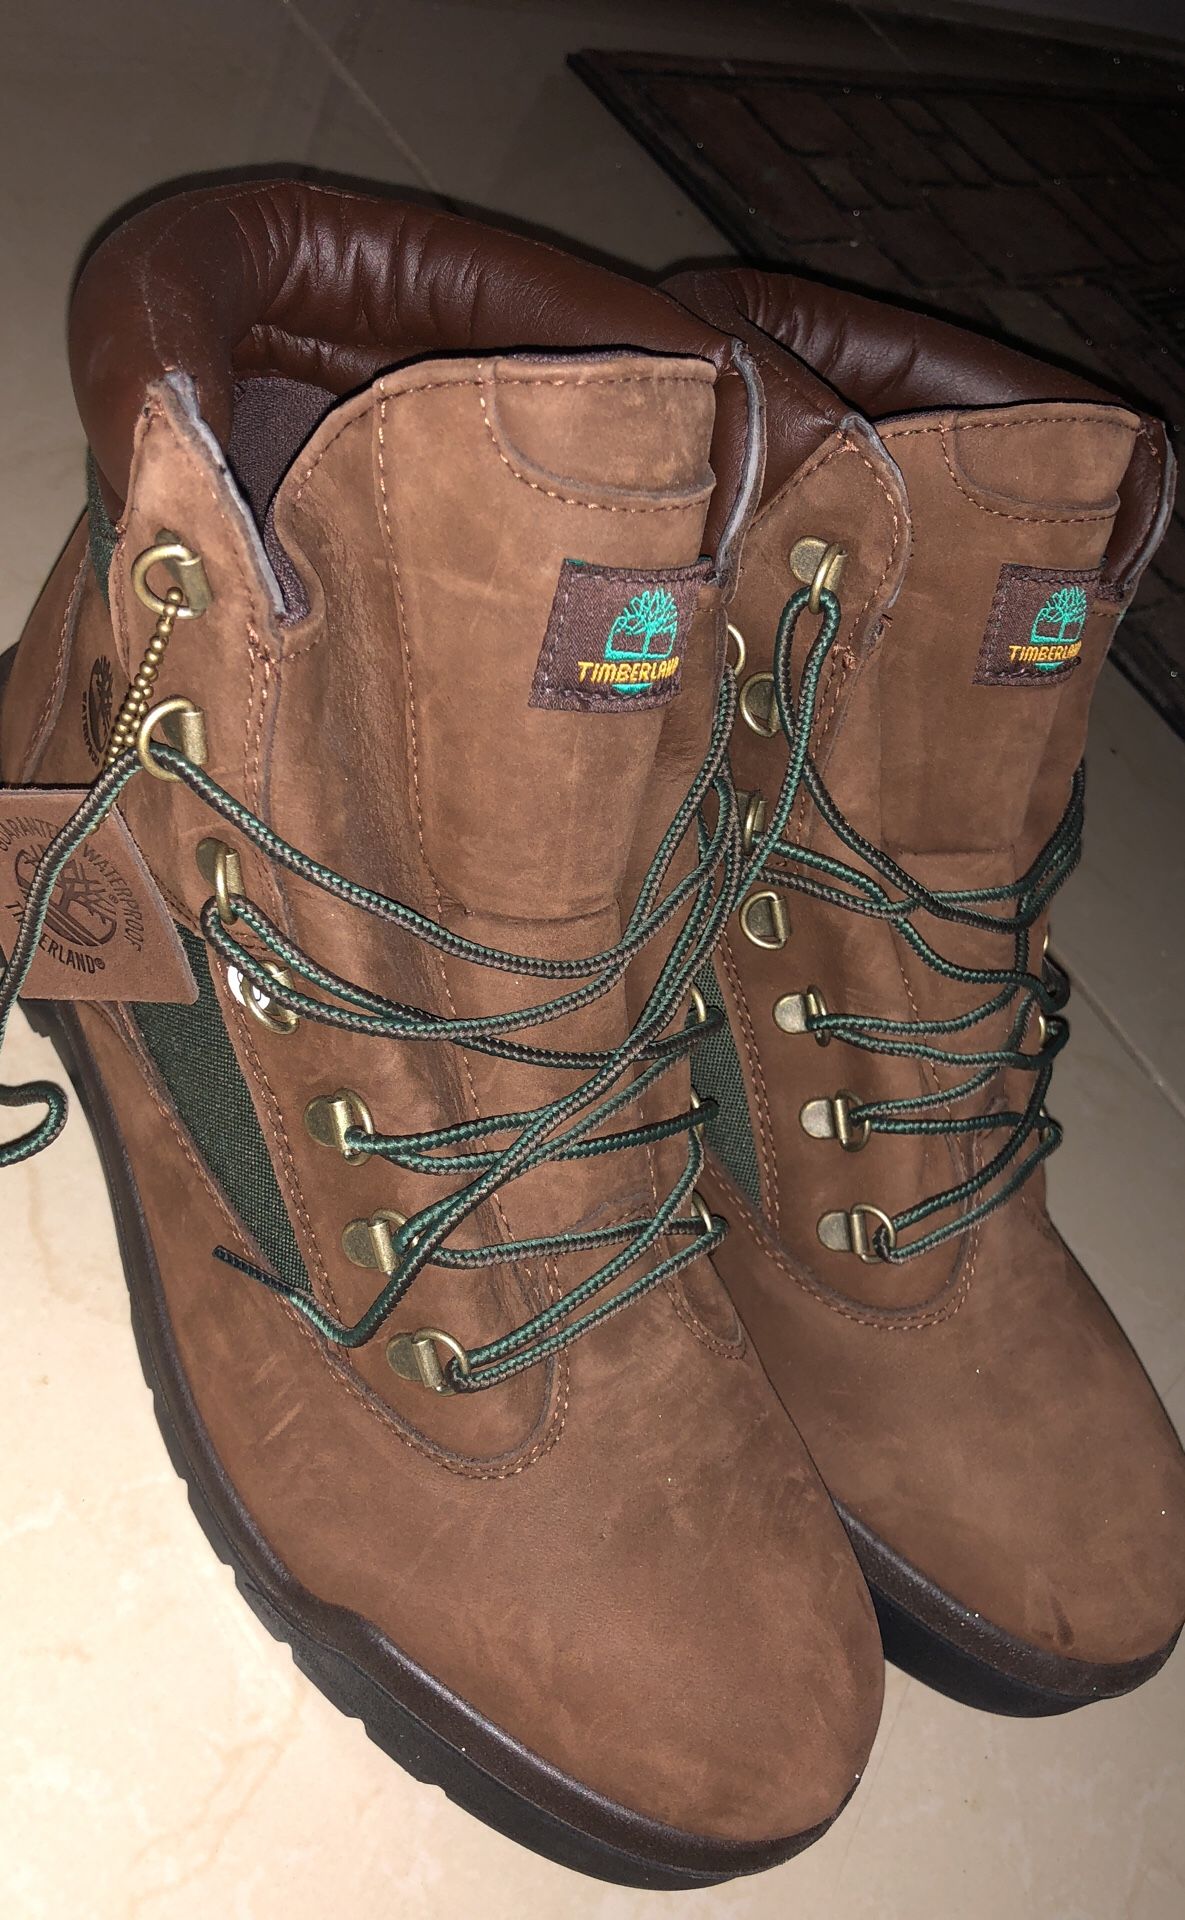 Brand new timberland beef & broccoli boots size 13